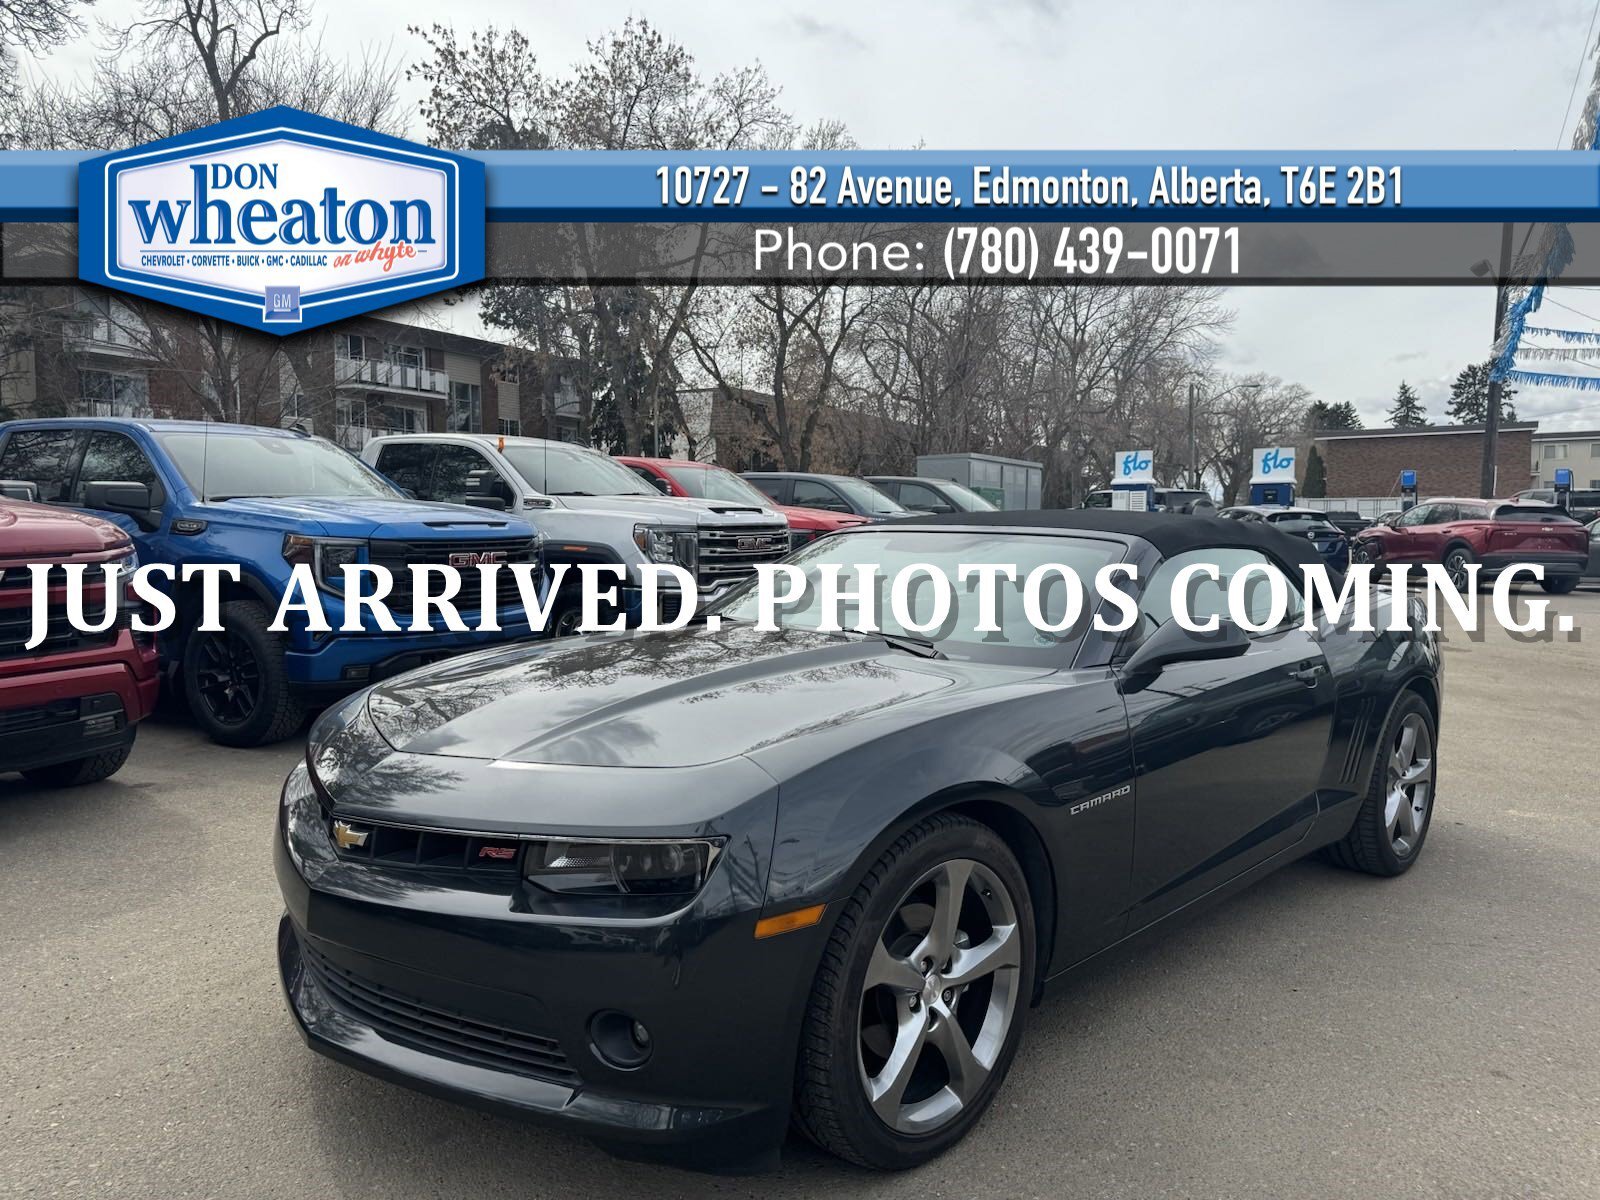 2014 Chevrolet Camaro 2LT RS Auto Heated Leather HUD Remote Start 20inch